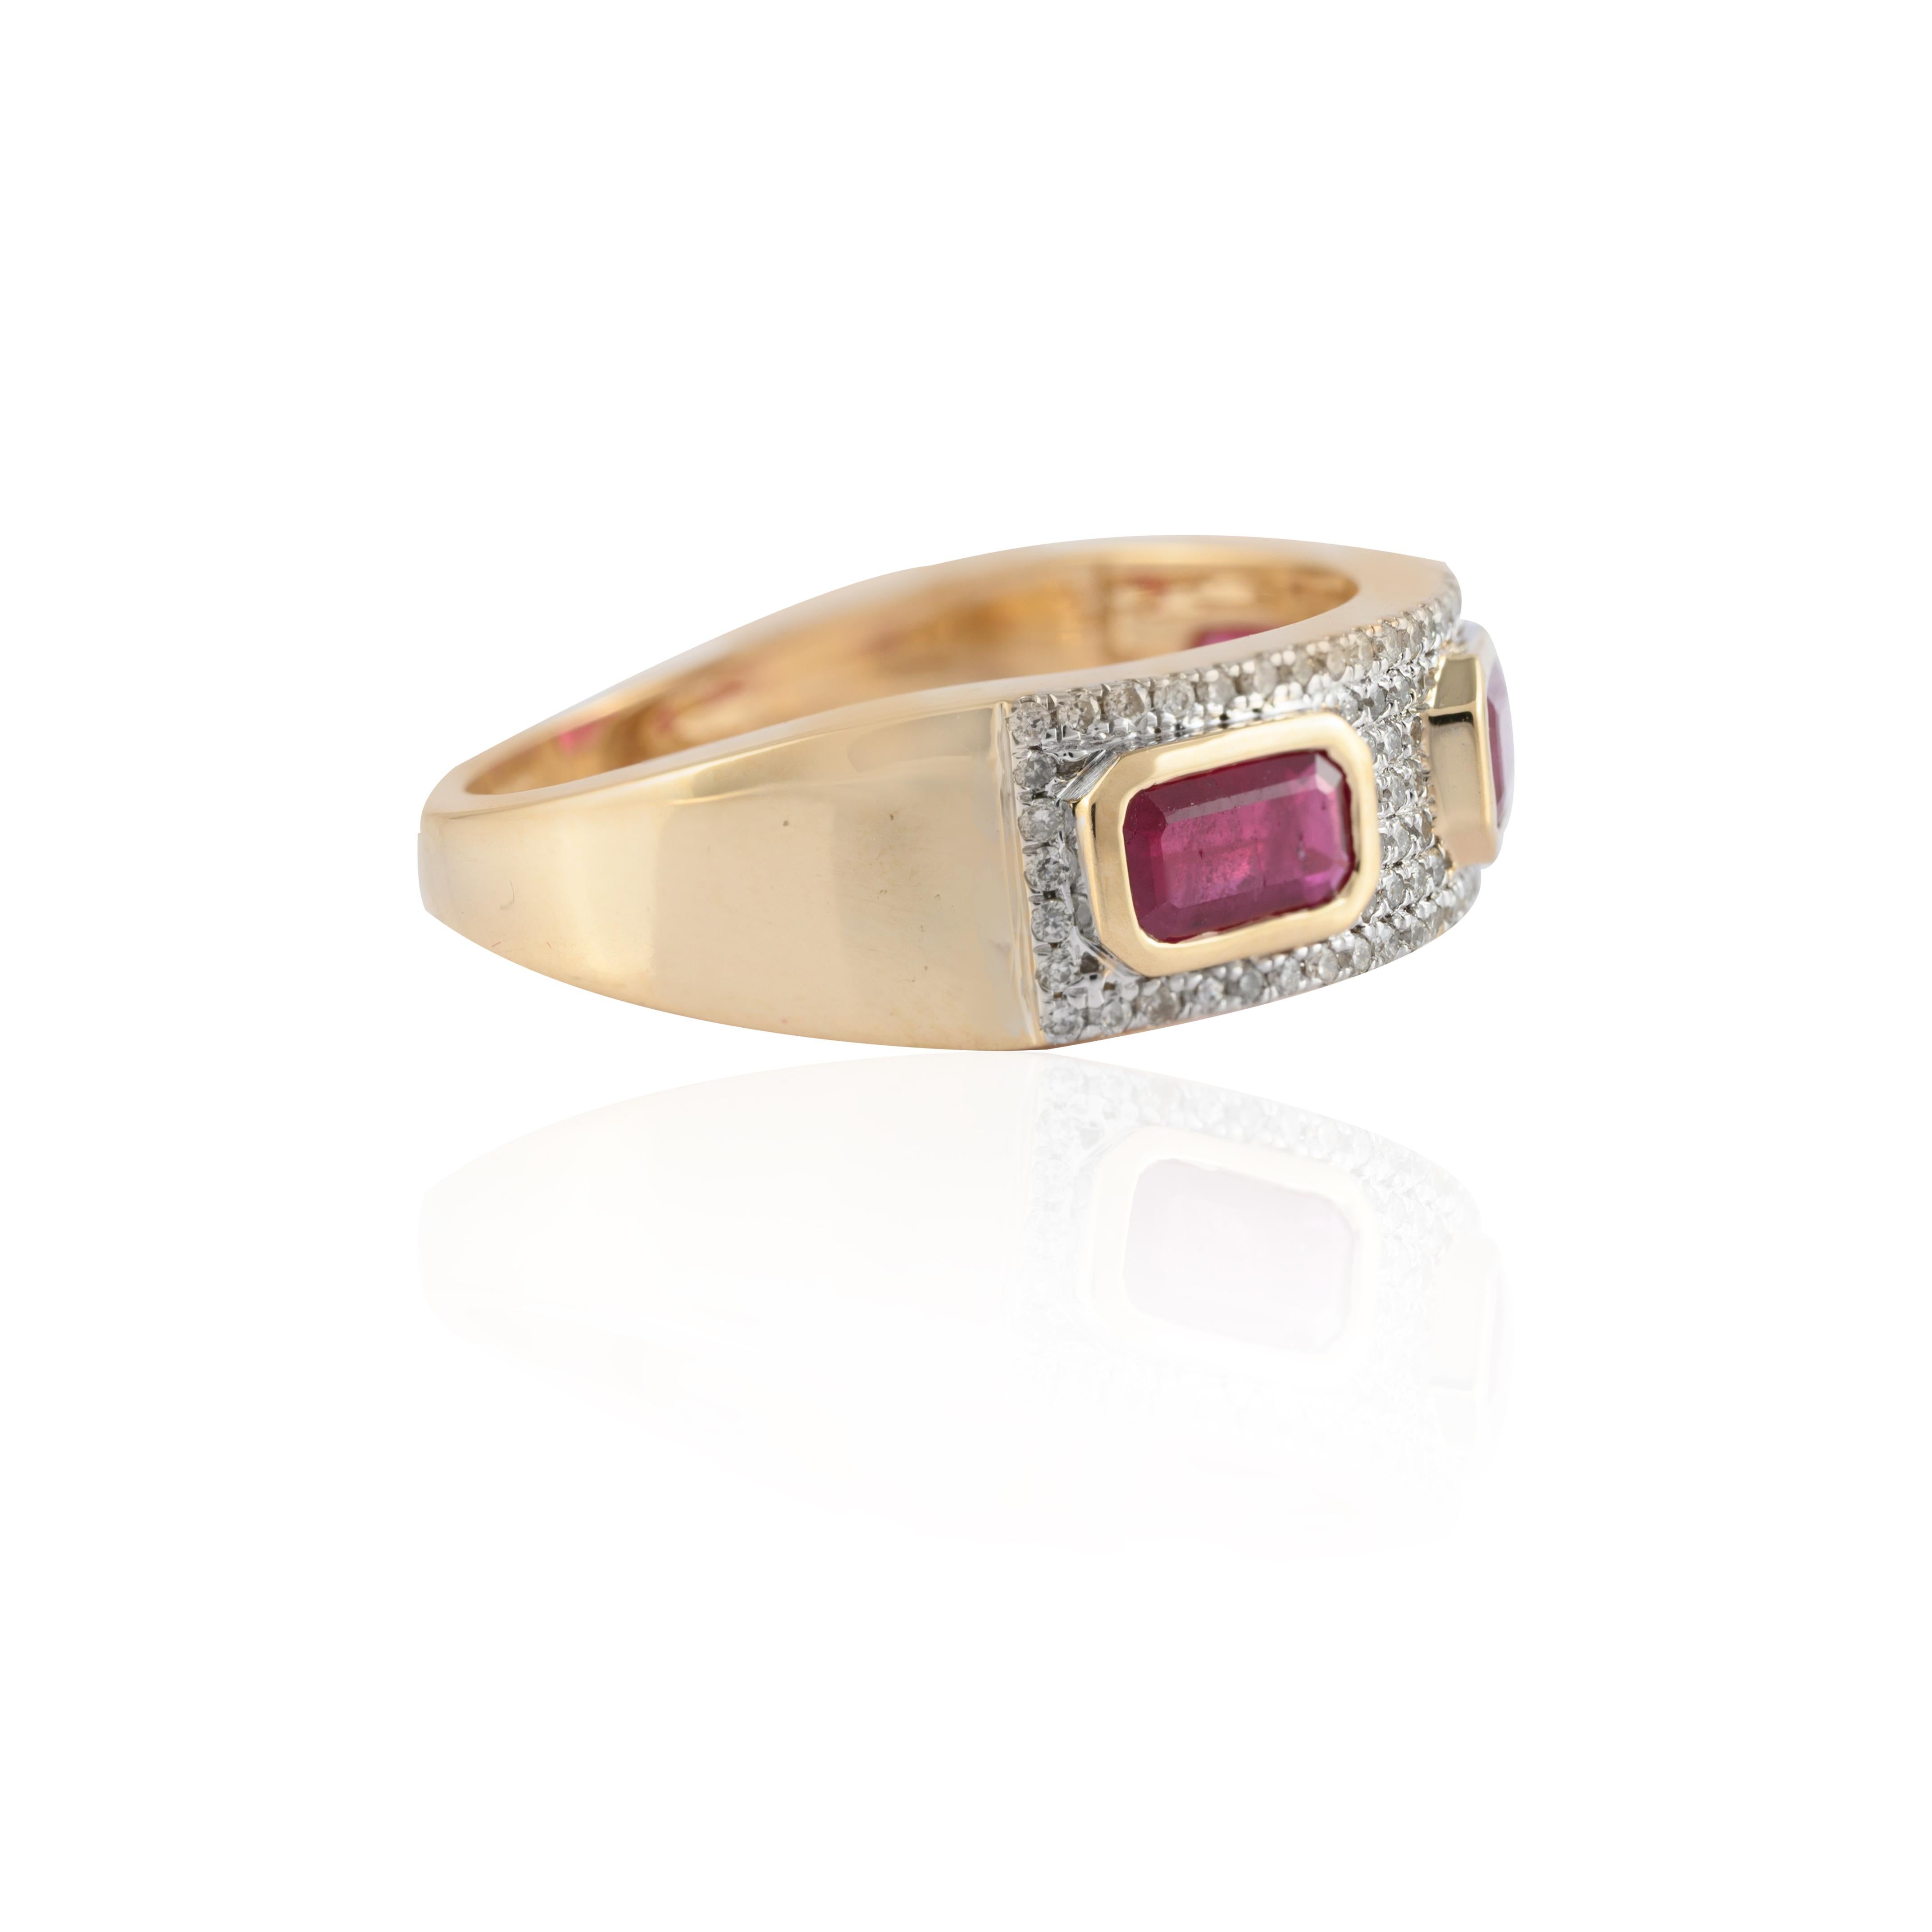 For Sale:  Statement Diamond Ruby Band Ring Gift for Him in 14k Solid Yellow Gold 3